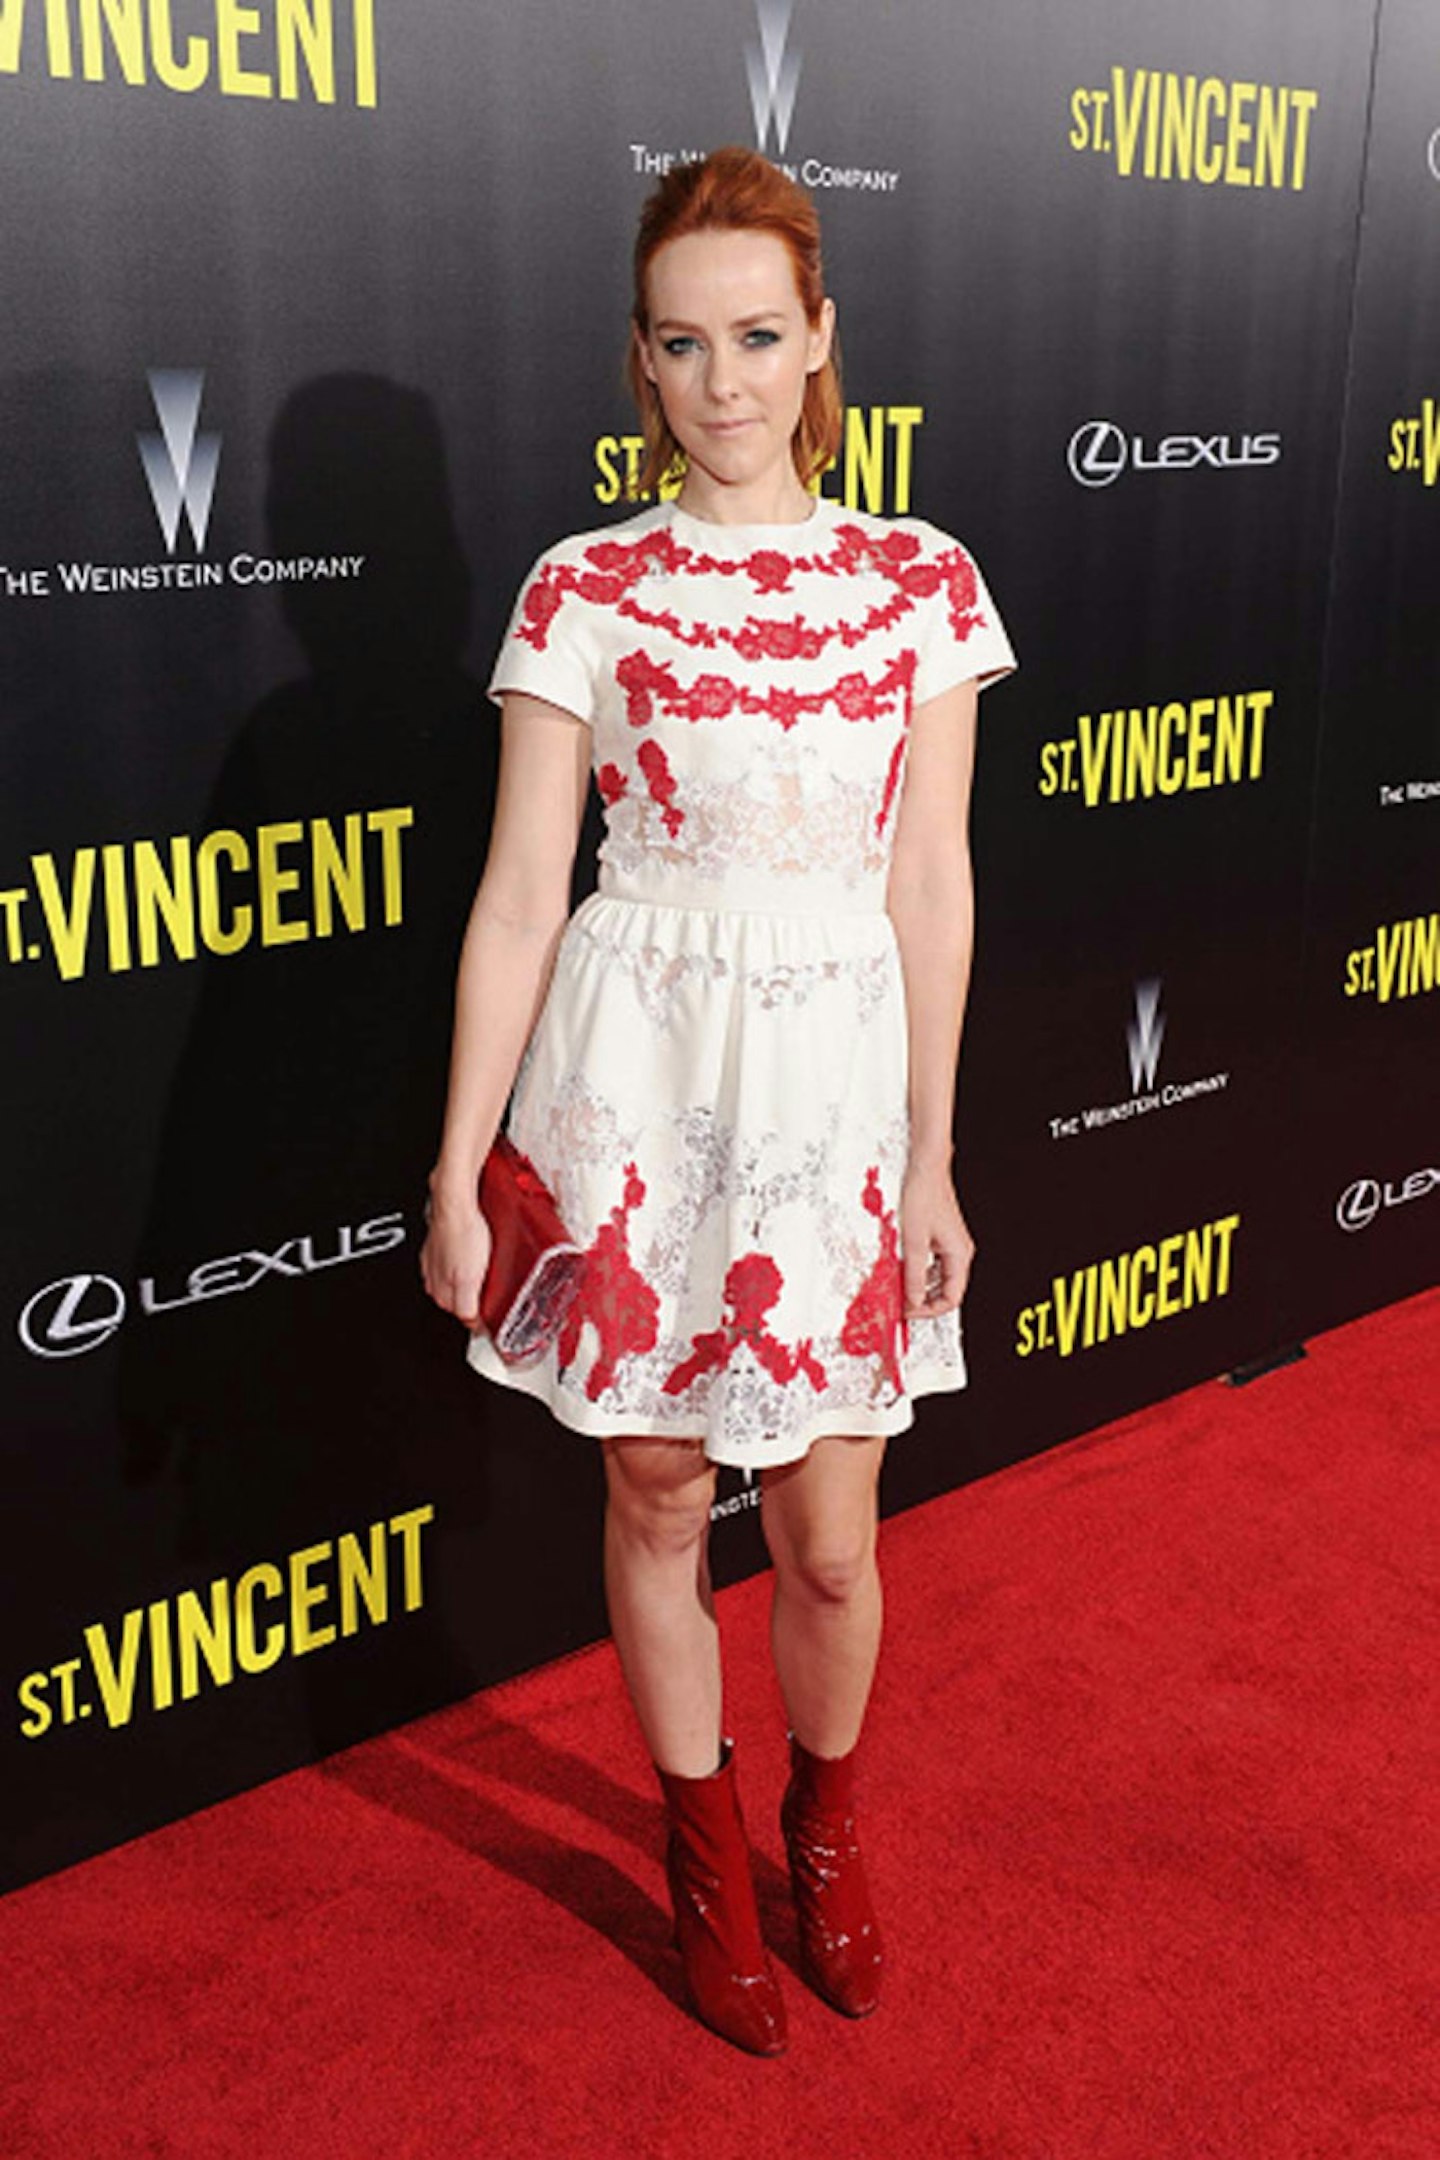 Jena Malone in Valentino at the premiere of ST. VINCENT in New York City - October 6, 2014